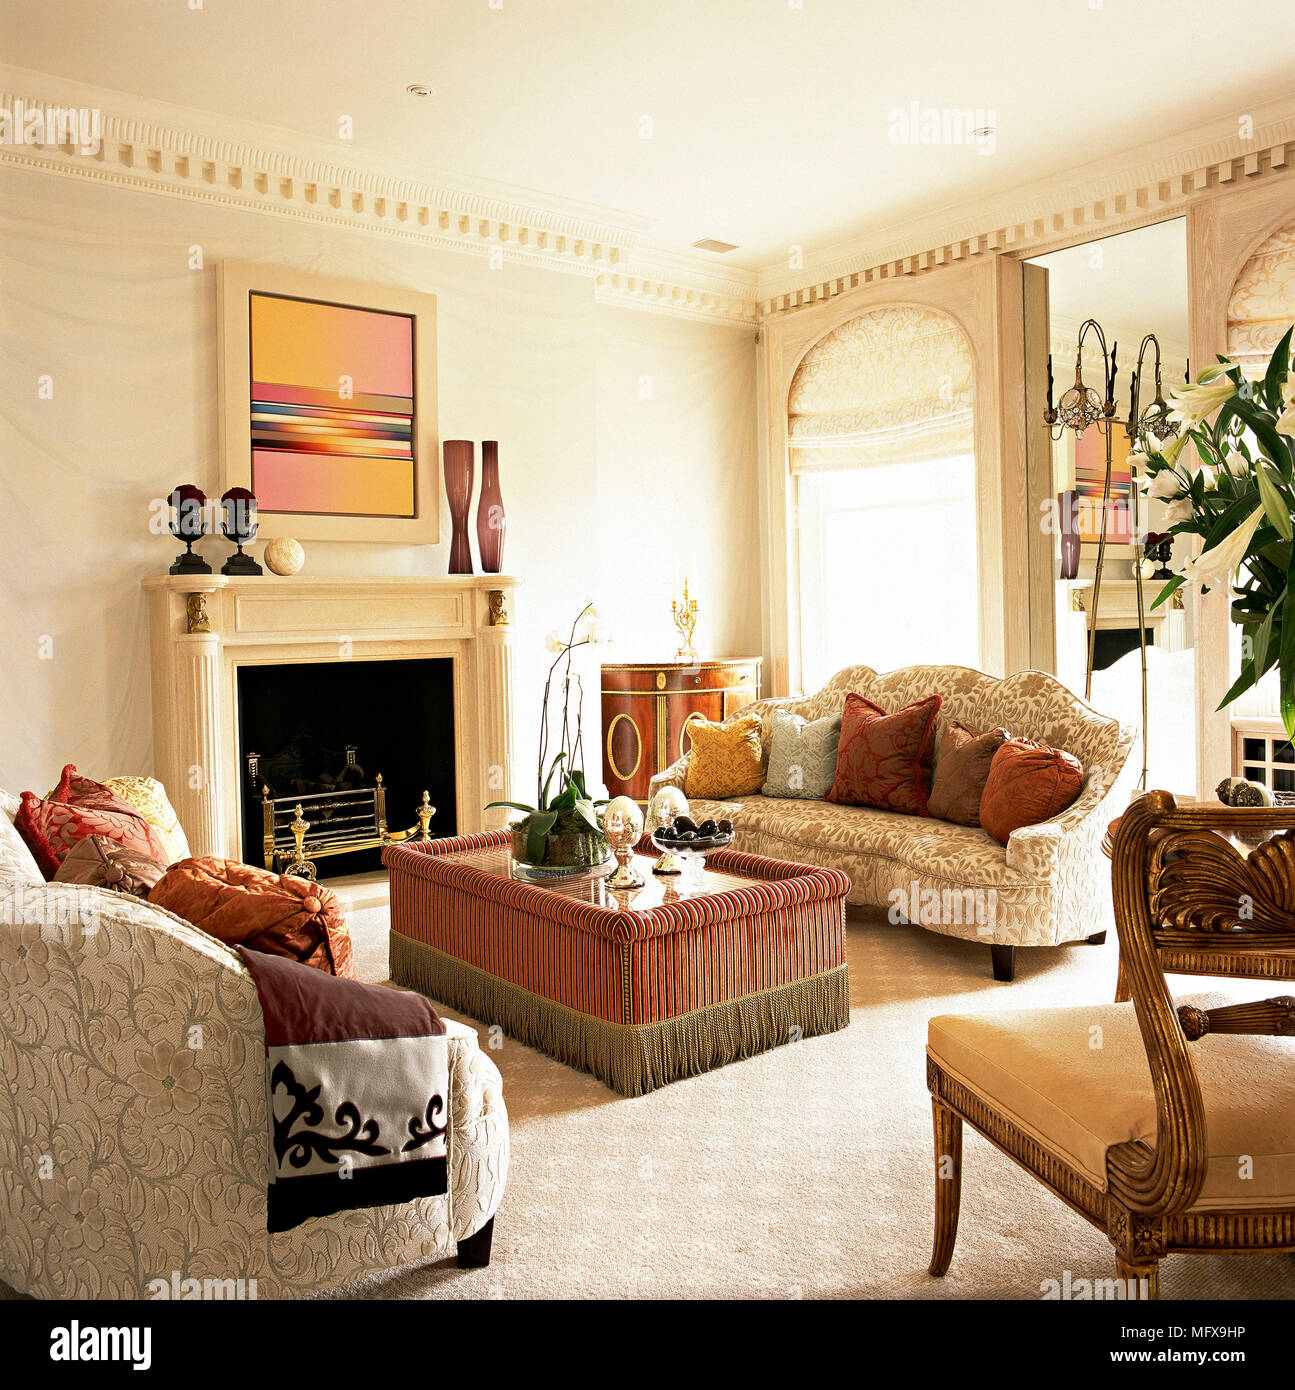 A traditional, sitting room with fireplace, ornate cornice, upholstered sofa, coffee table, carpet, Stock Photo